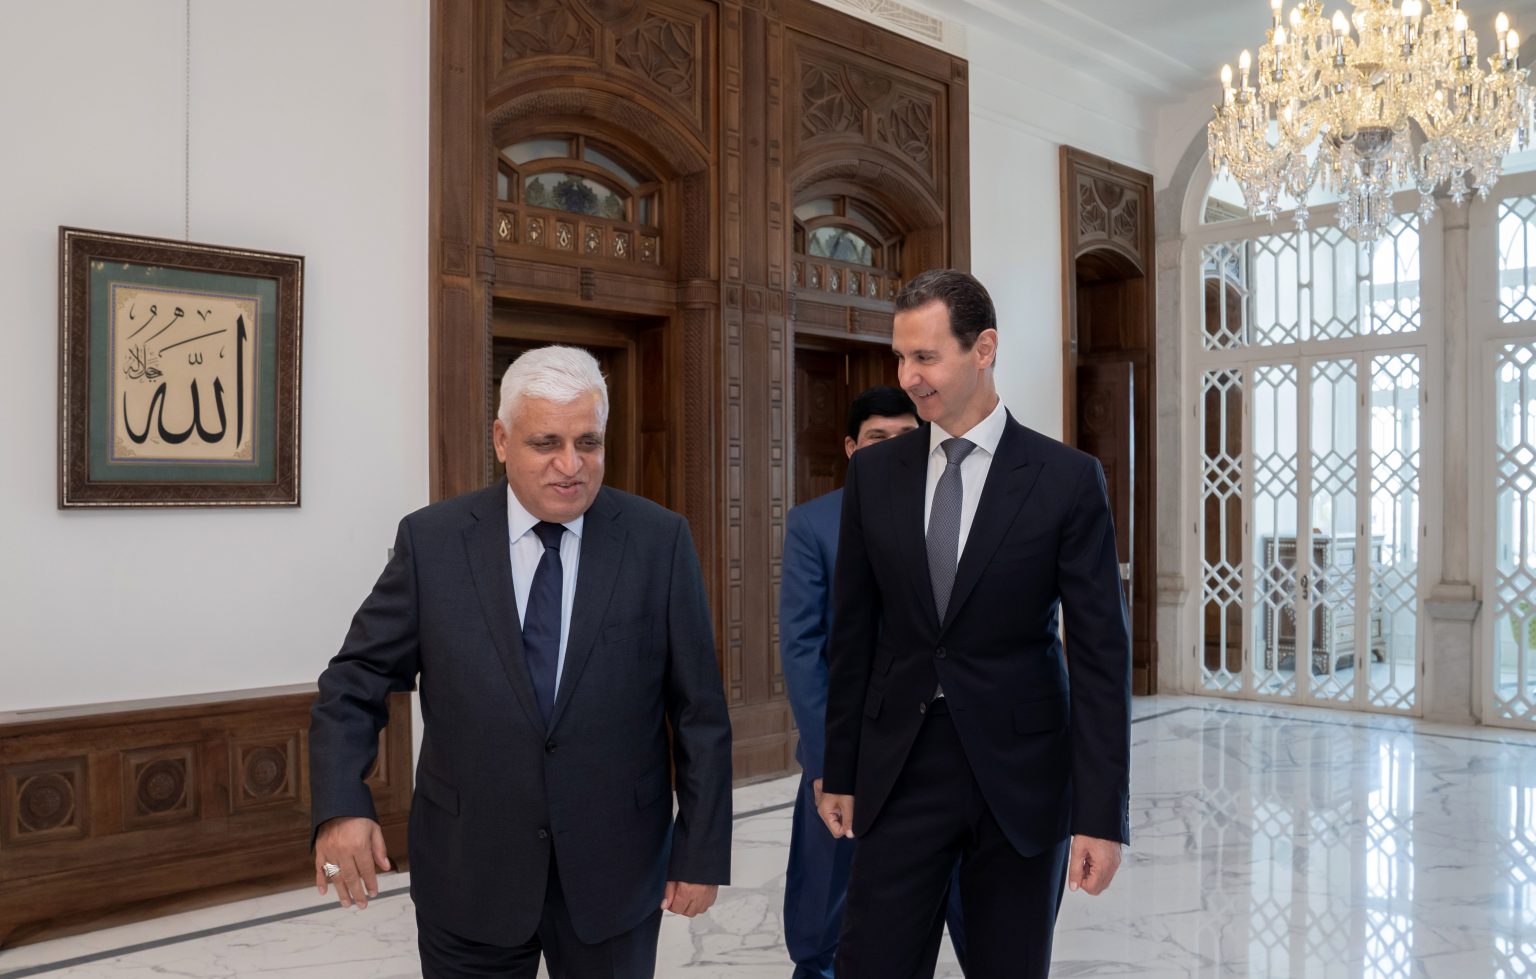 President Assad Receives Letter From Iraqi PM on Baghdad Summit